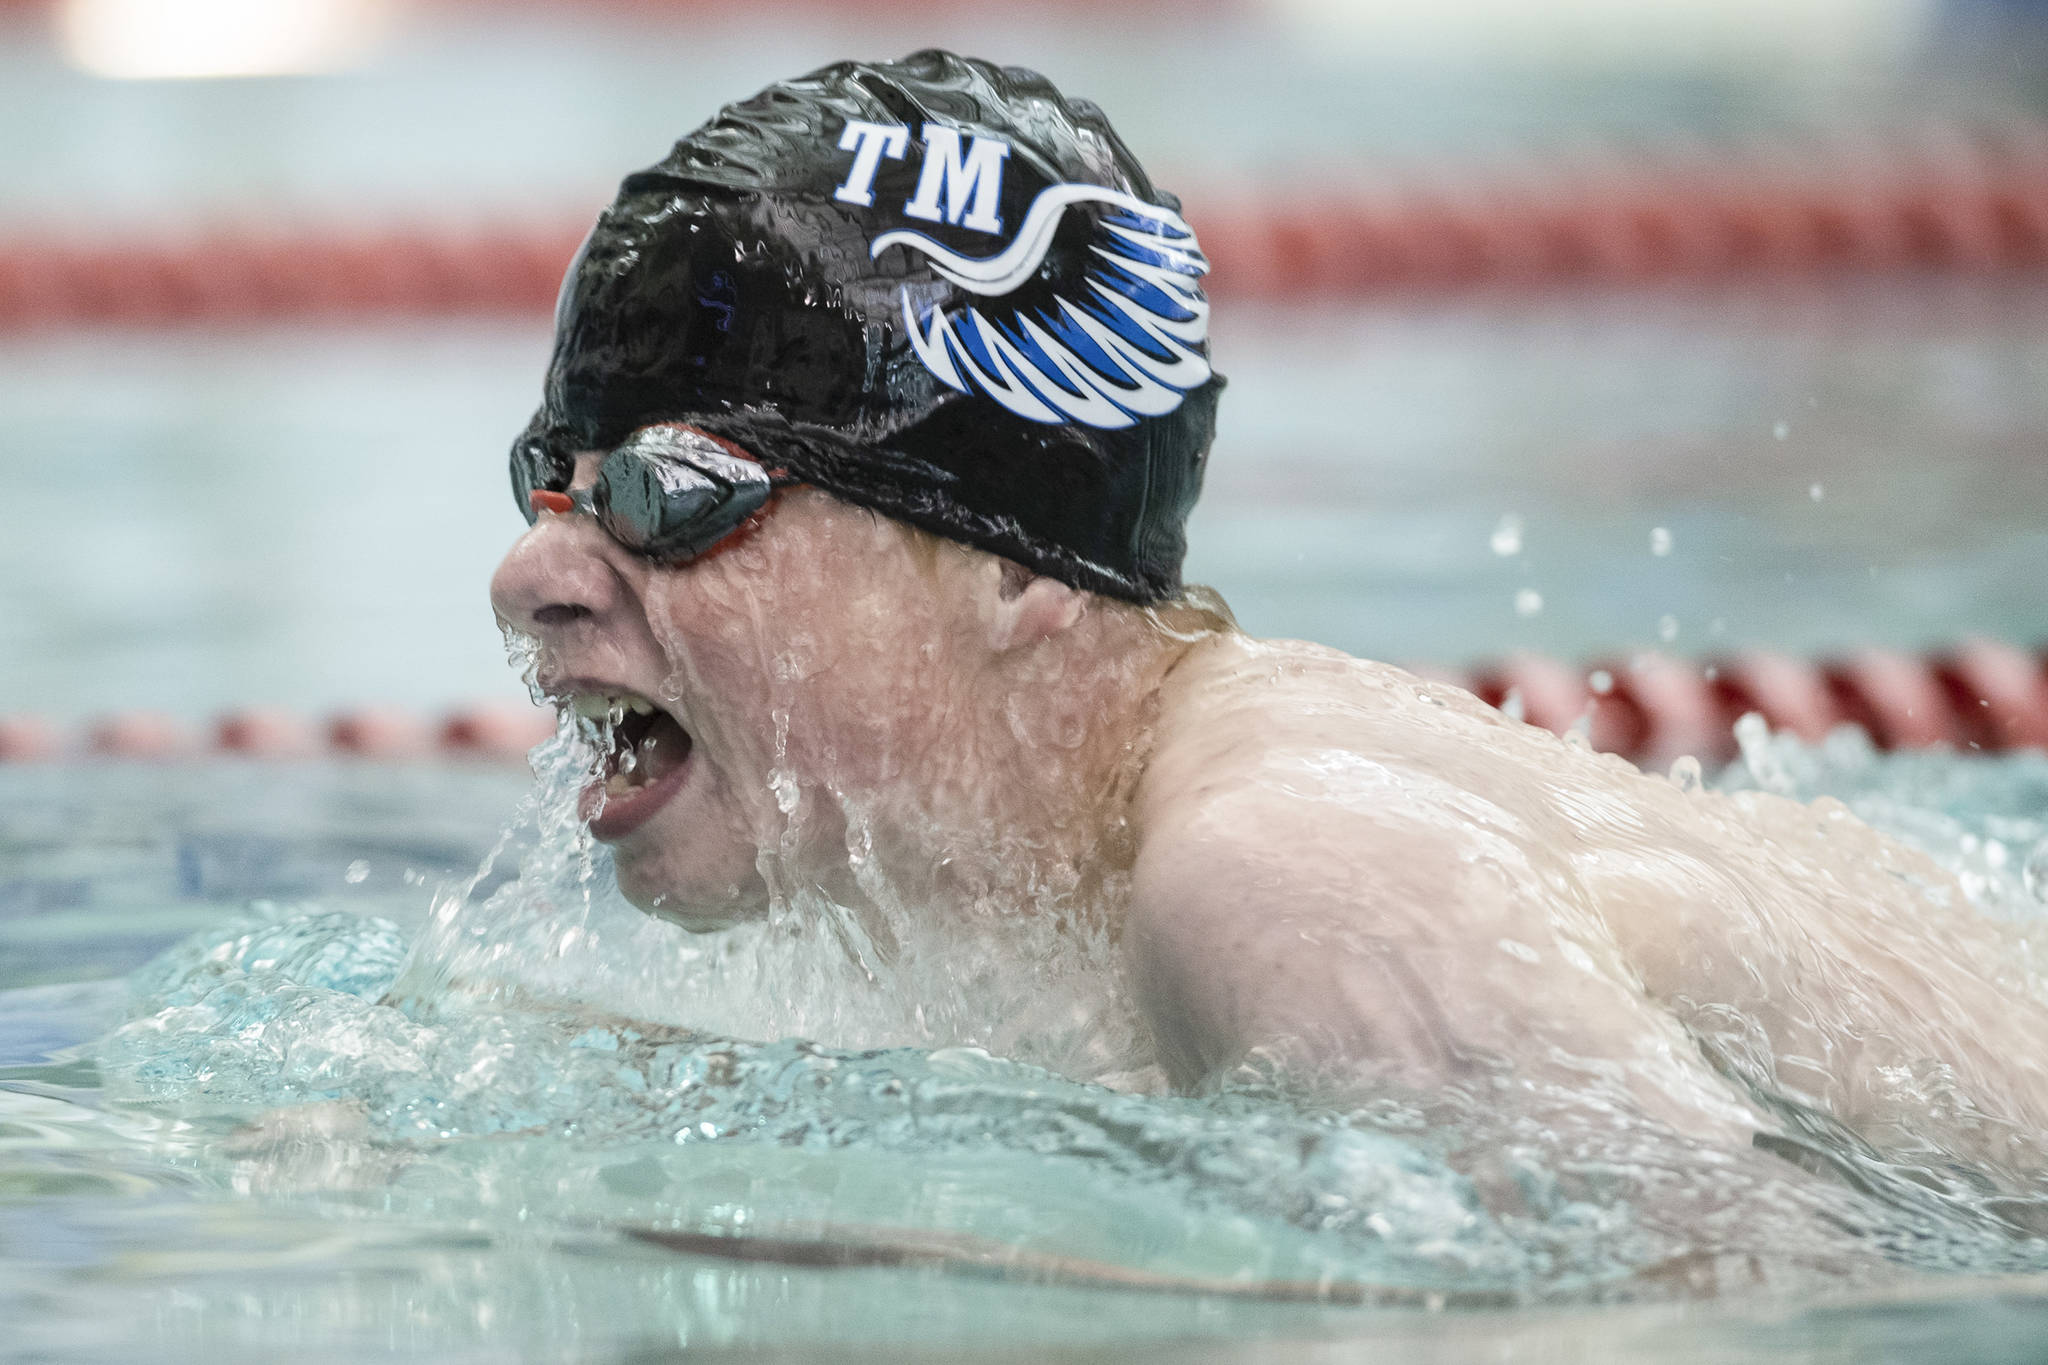 Thunder Mountain’s Sven Rasmussen competes in the 200 Yard IM at the Juneau Invitational Swim Meet at the Dimond Park Aquatic Center on Friday, Sept. 20, 2019. (Michael Penn | Juneau Empire)